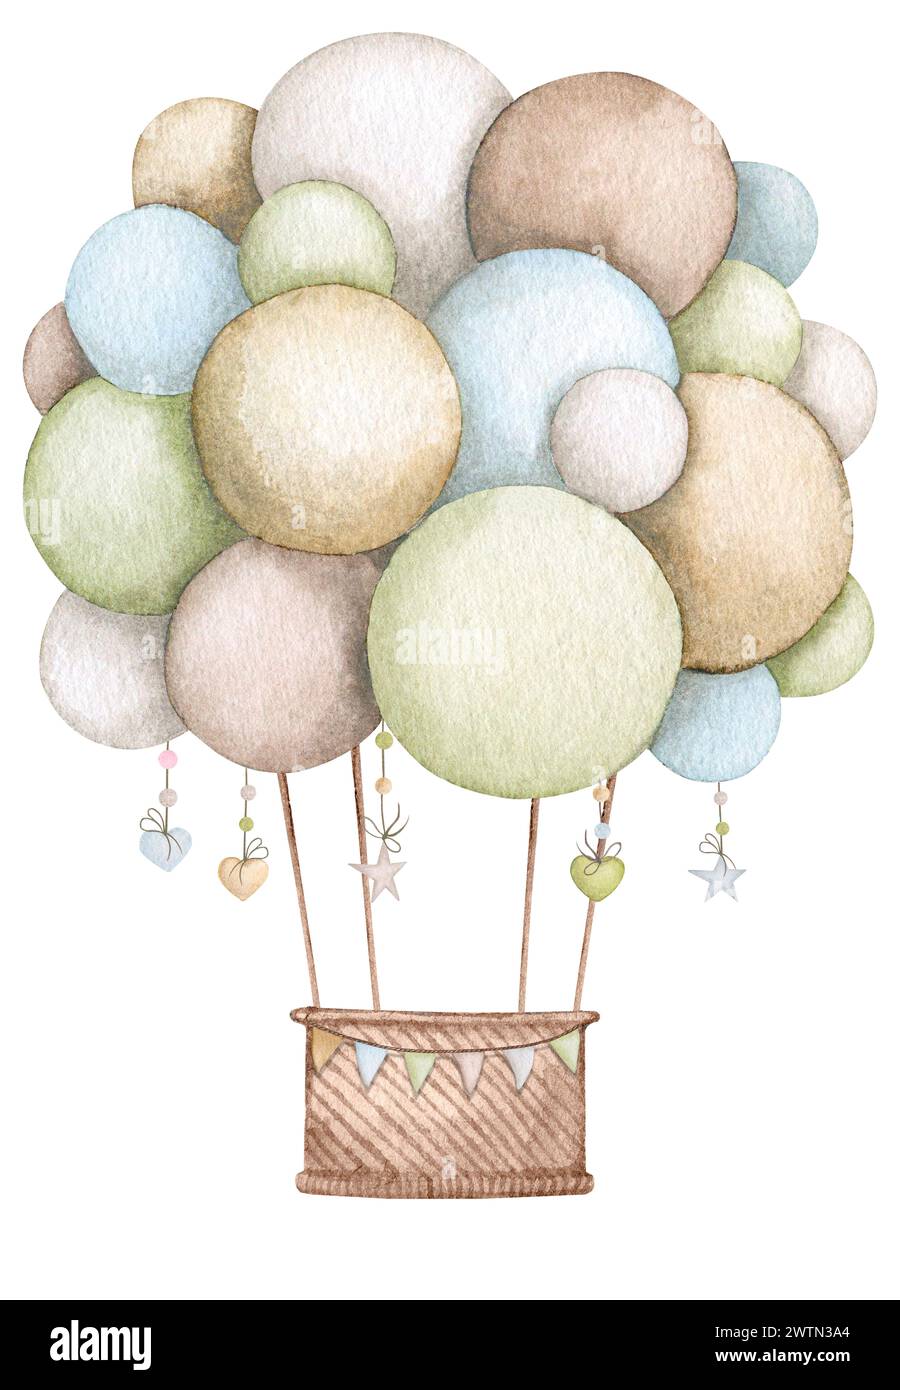 Air balloons with a basket in pastel colors. Children's watercolor illustration. Birthday, baby shower, children's party. Design element for cards, po Stock Photo